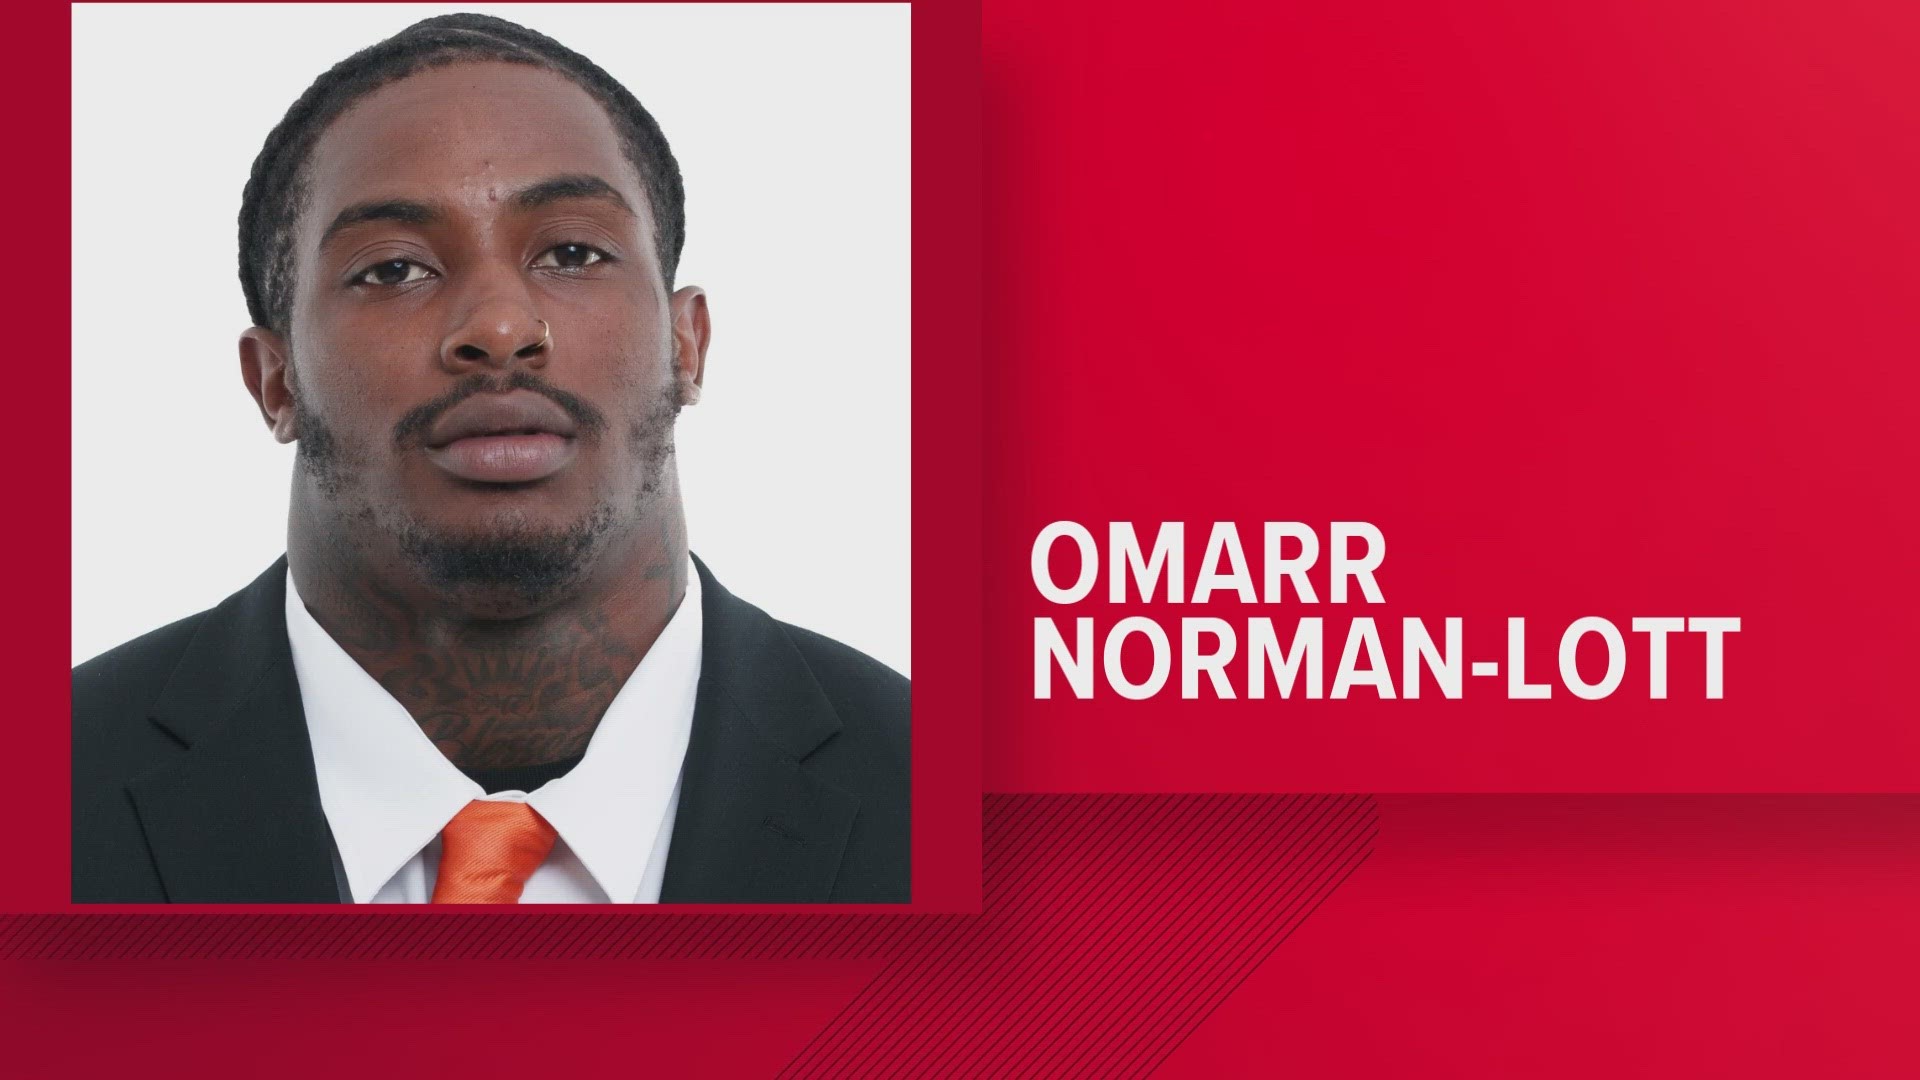 Tennessee defensive lineman Omarr Norman-Lott and three Florida players are suspended for the first half of their upcoming games on Saturday.